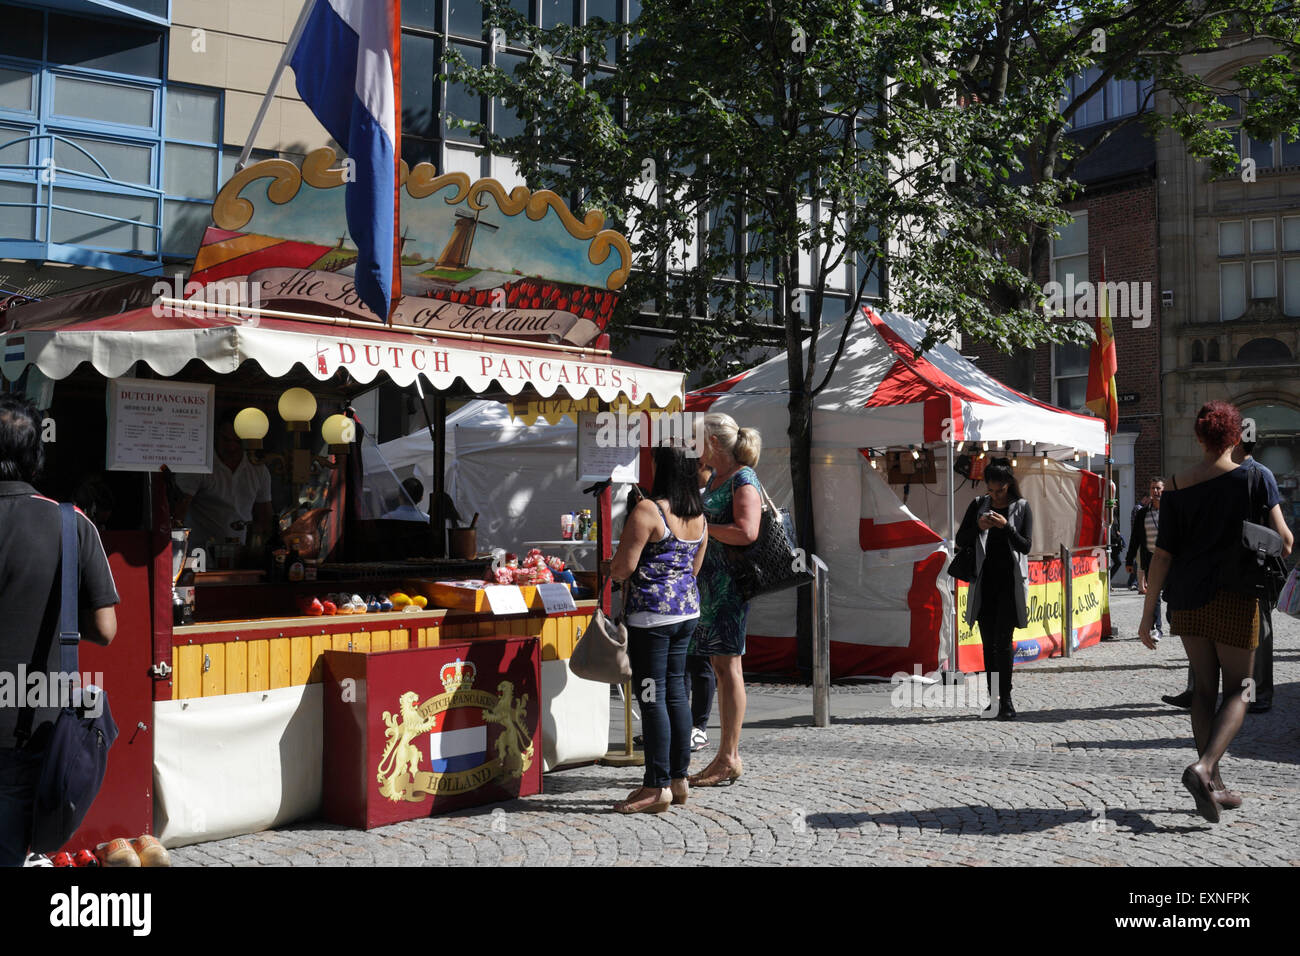 Outdoors street market in Sheffield city centre England, Food Stall Stock Photo